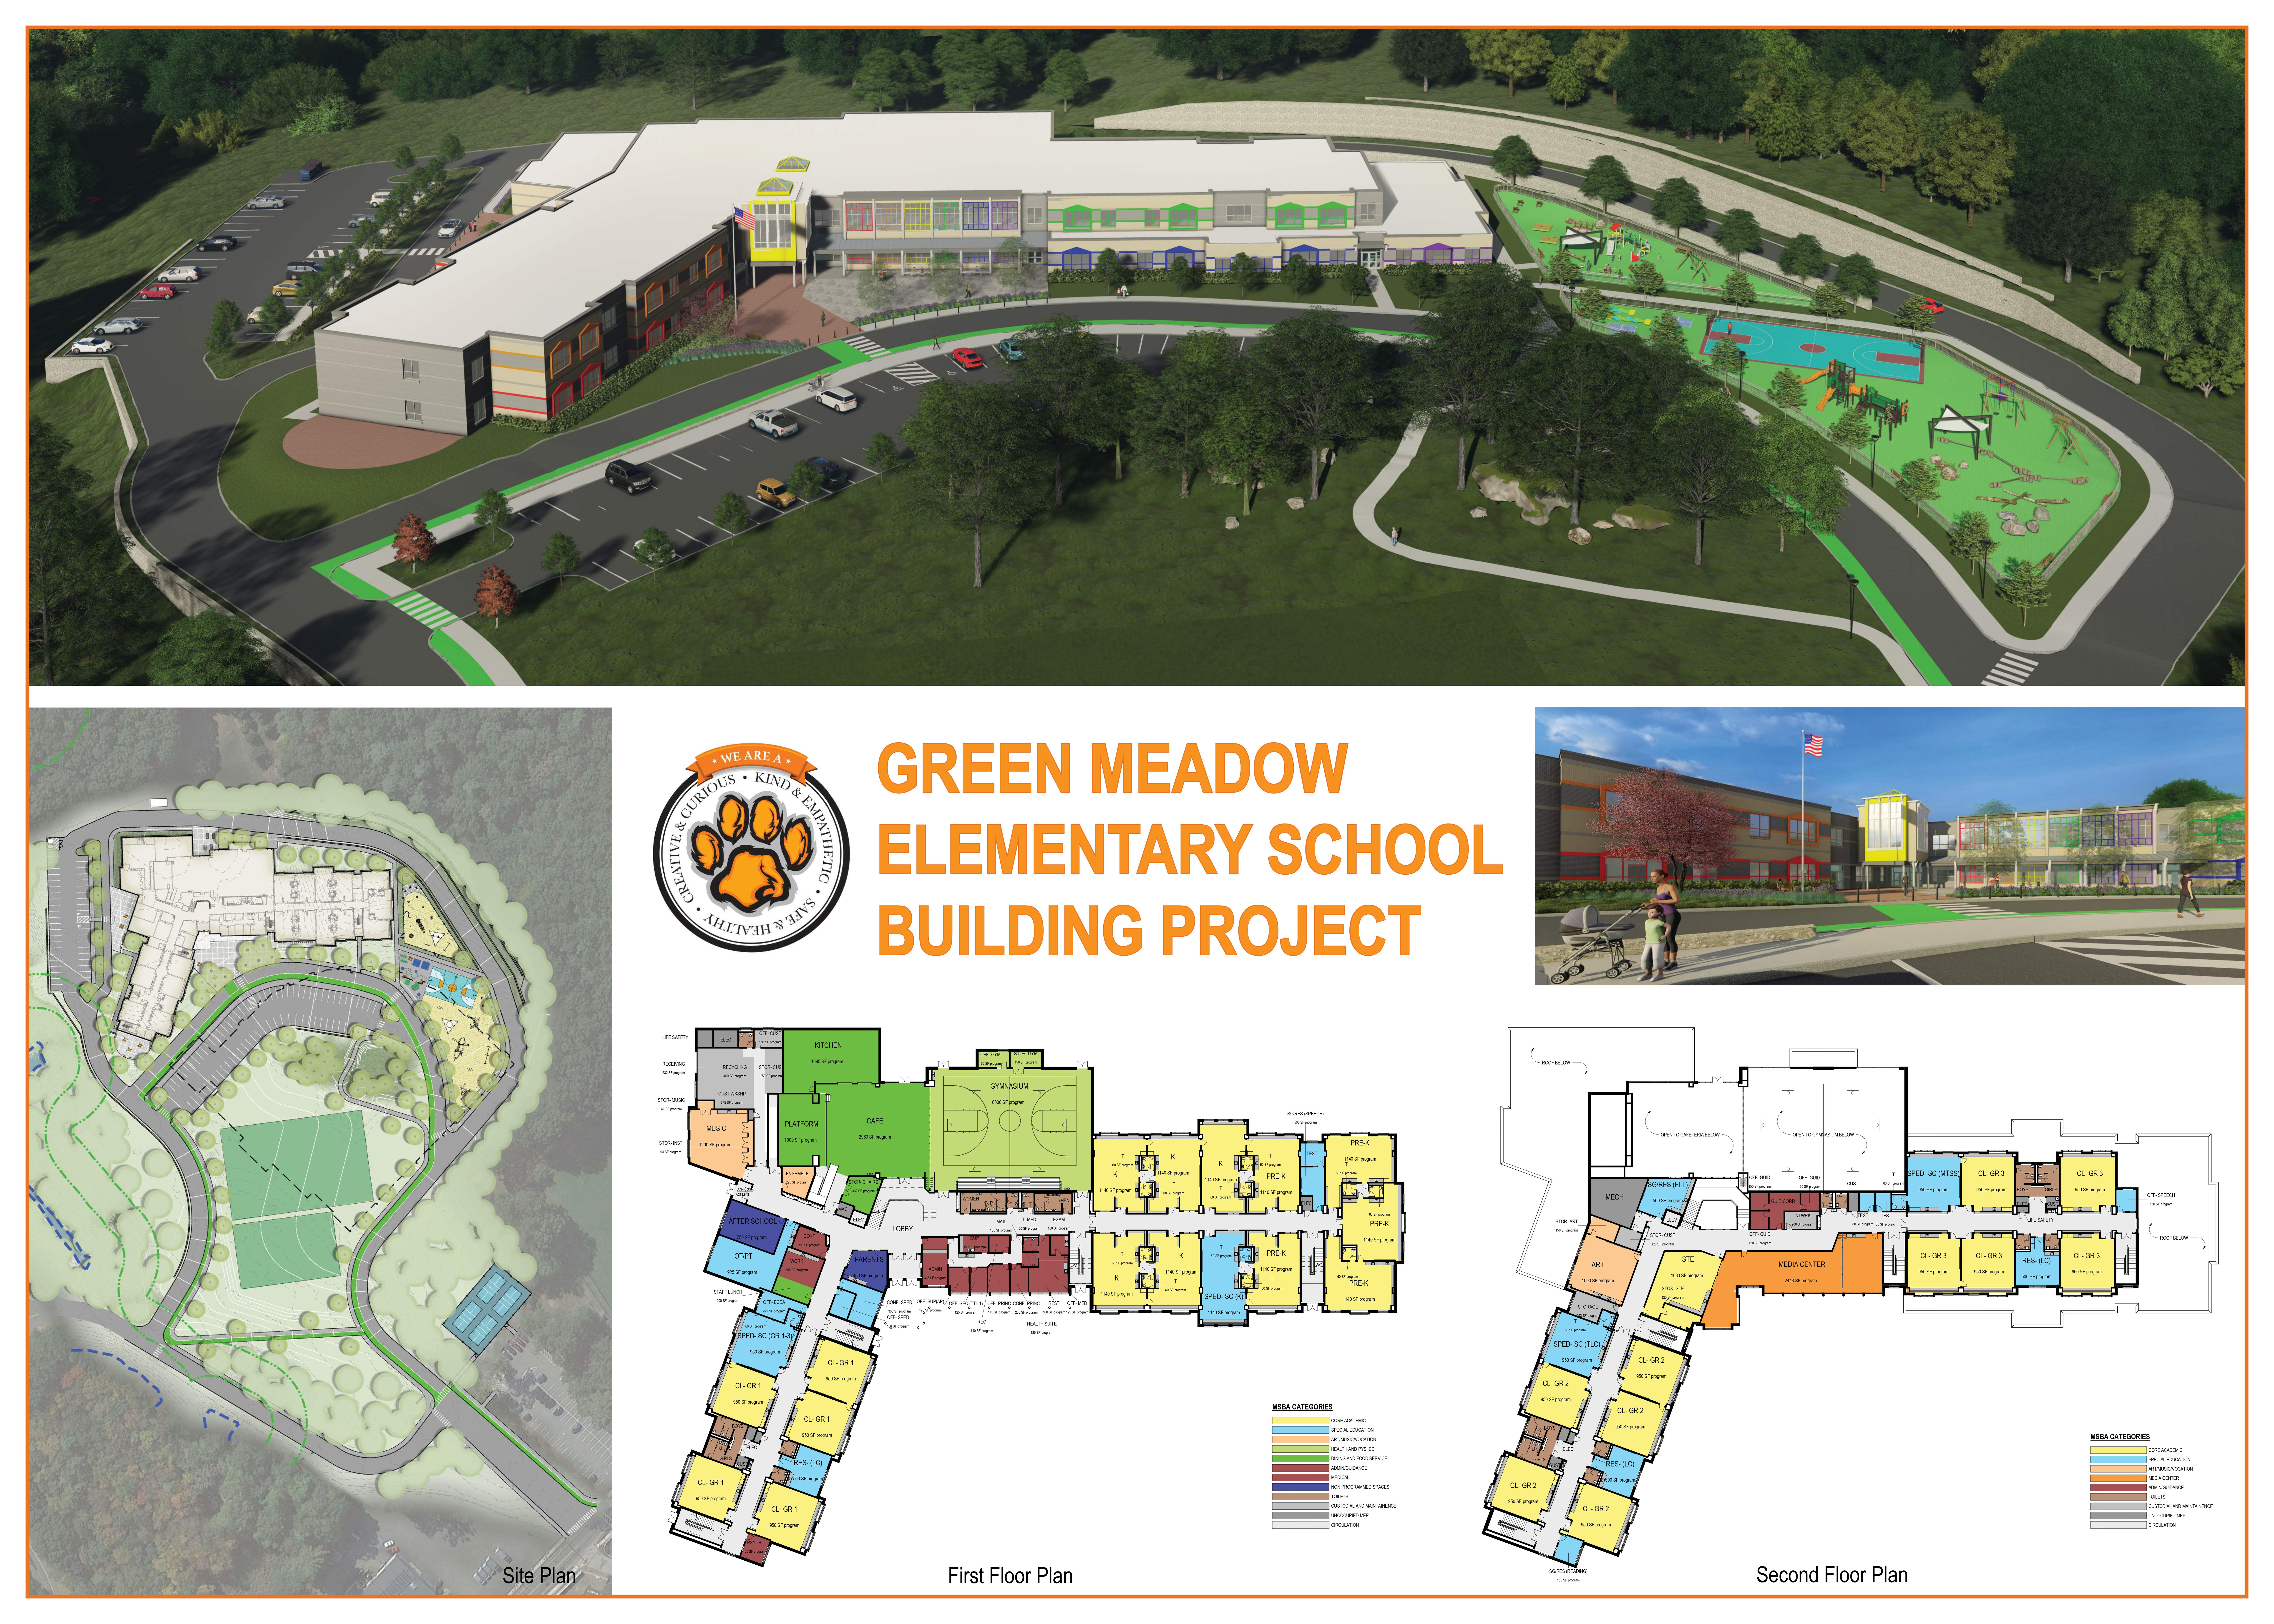 Images of the new school